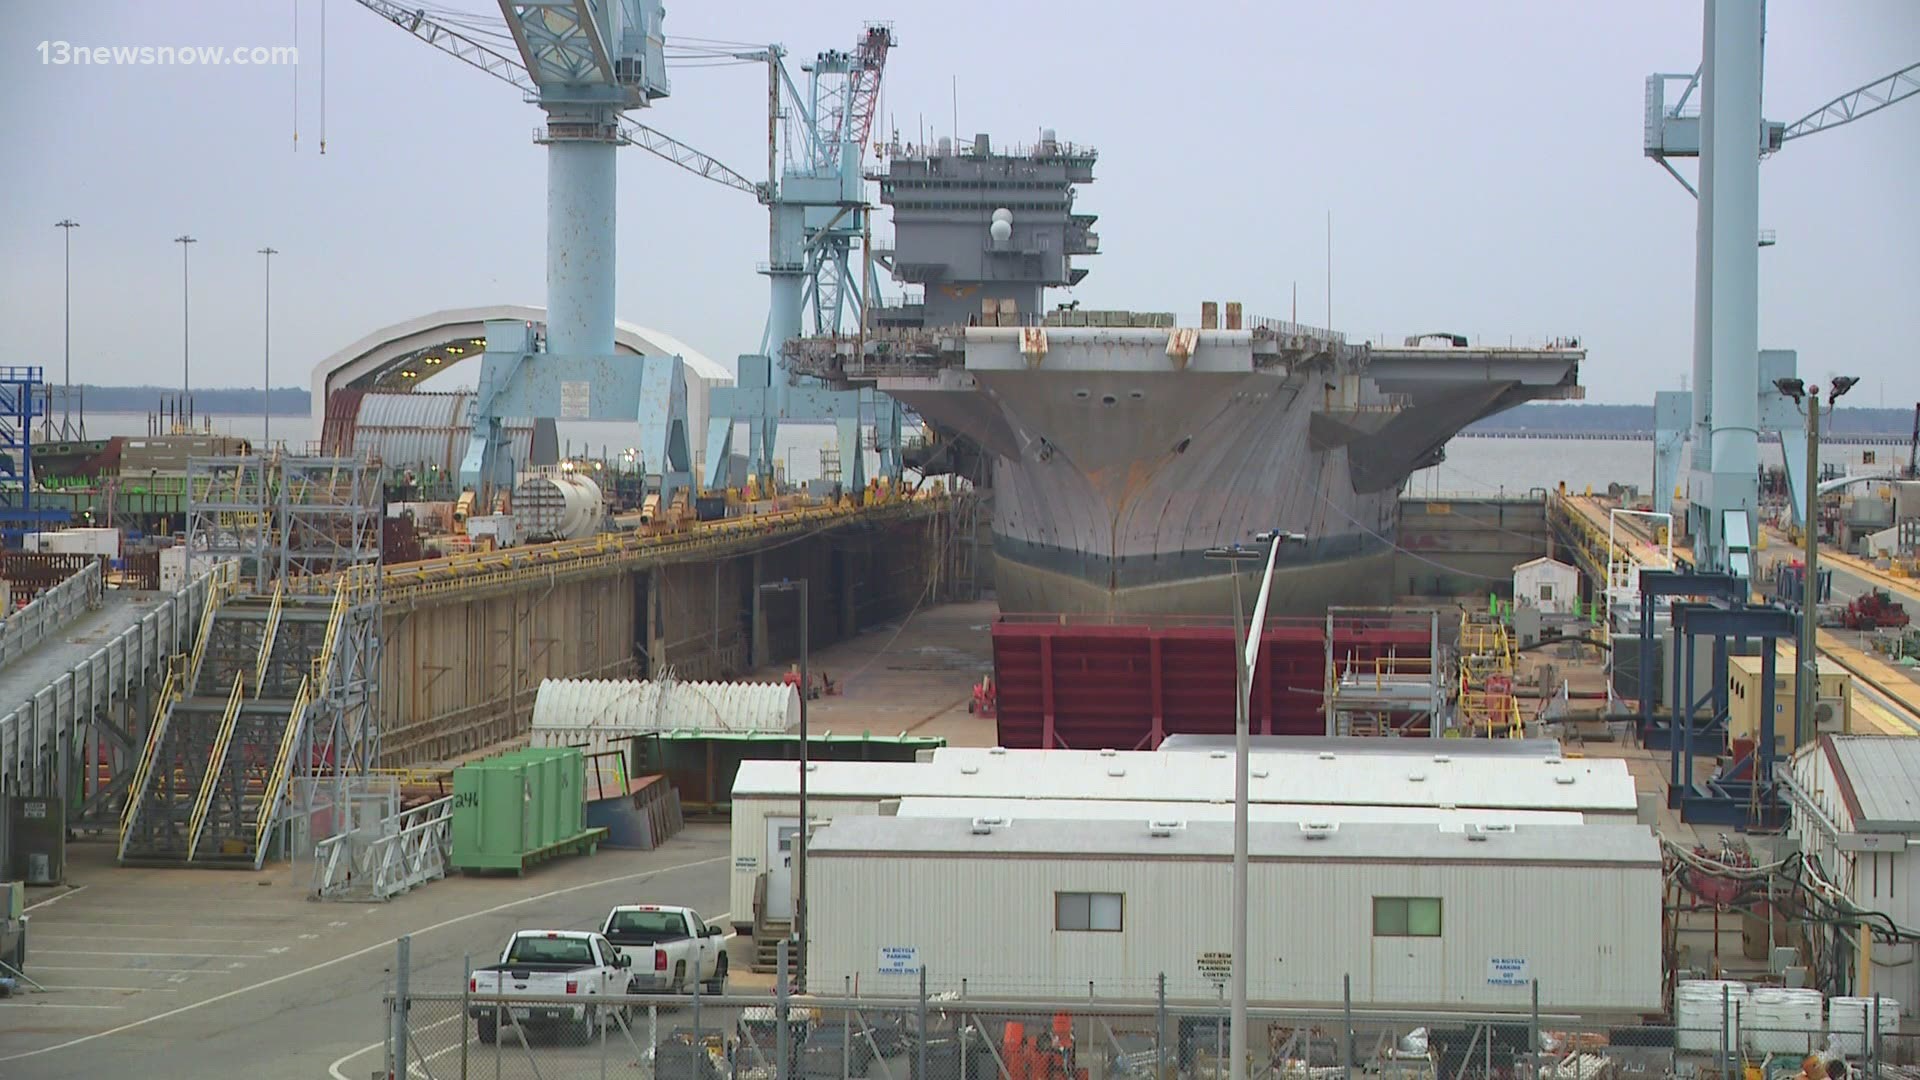 Newport News Shipbuilding lays off 300+ workers, demotes 100 managers